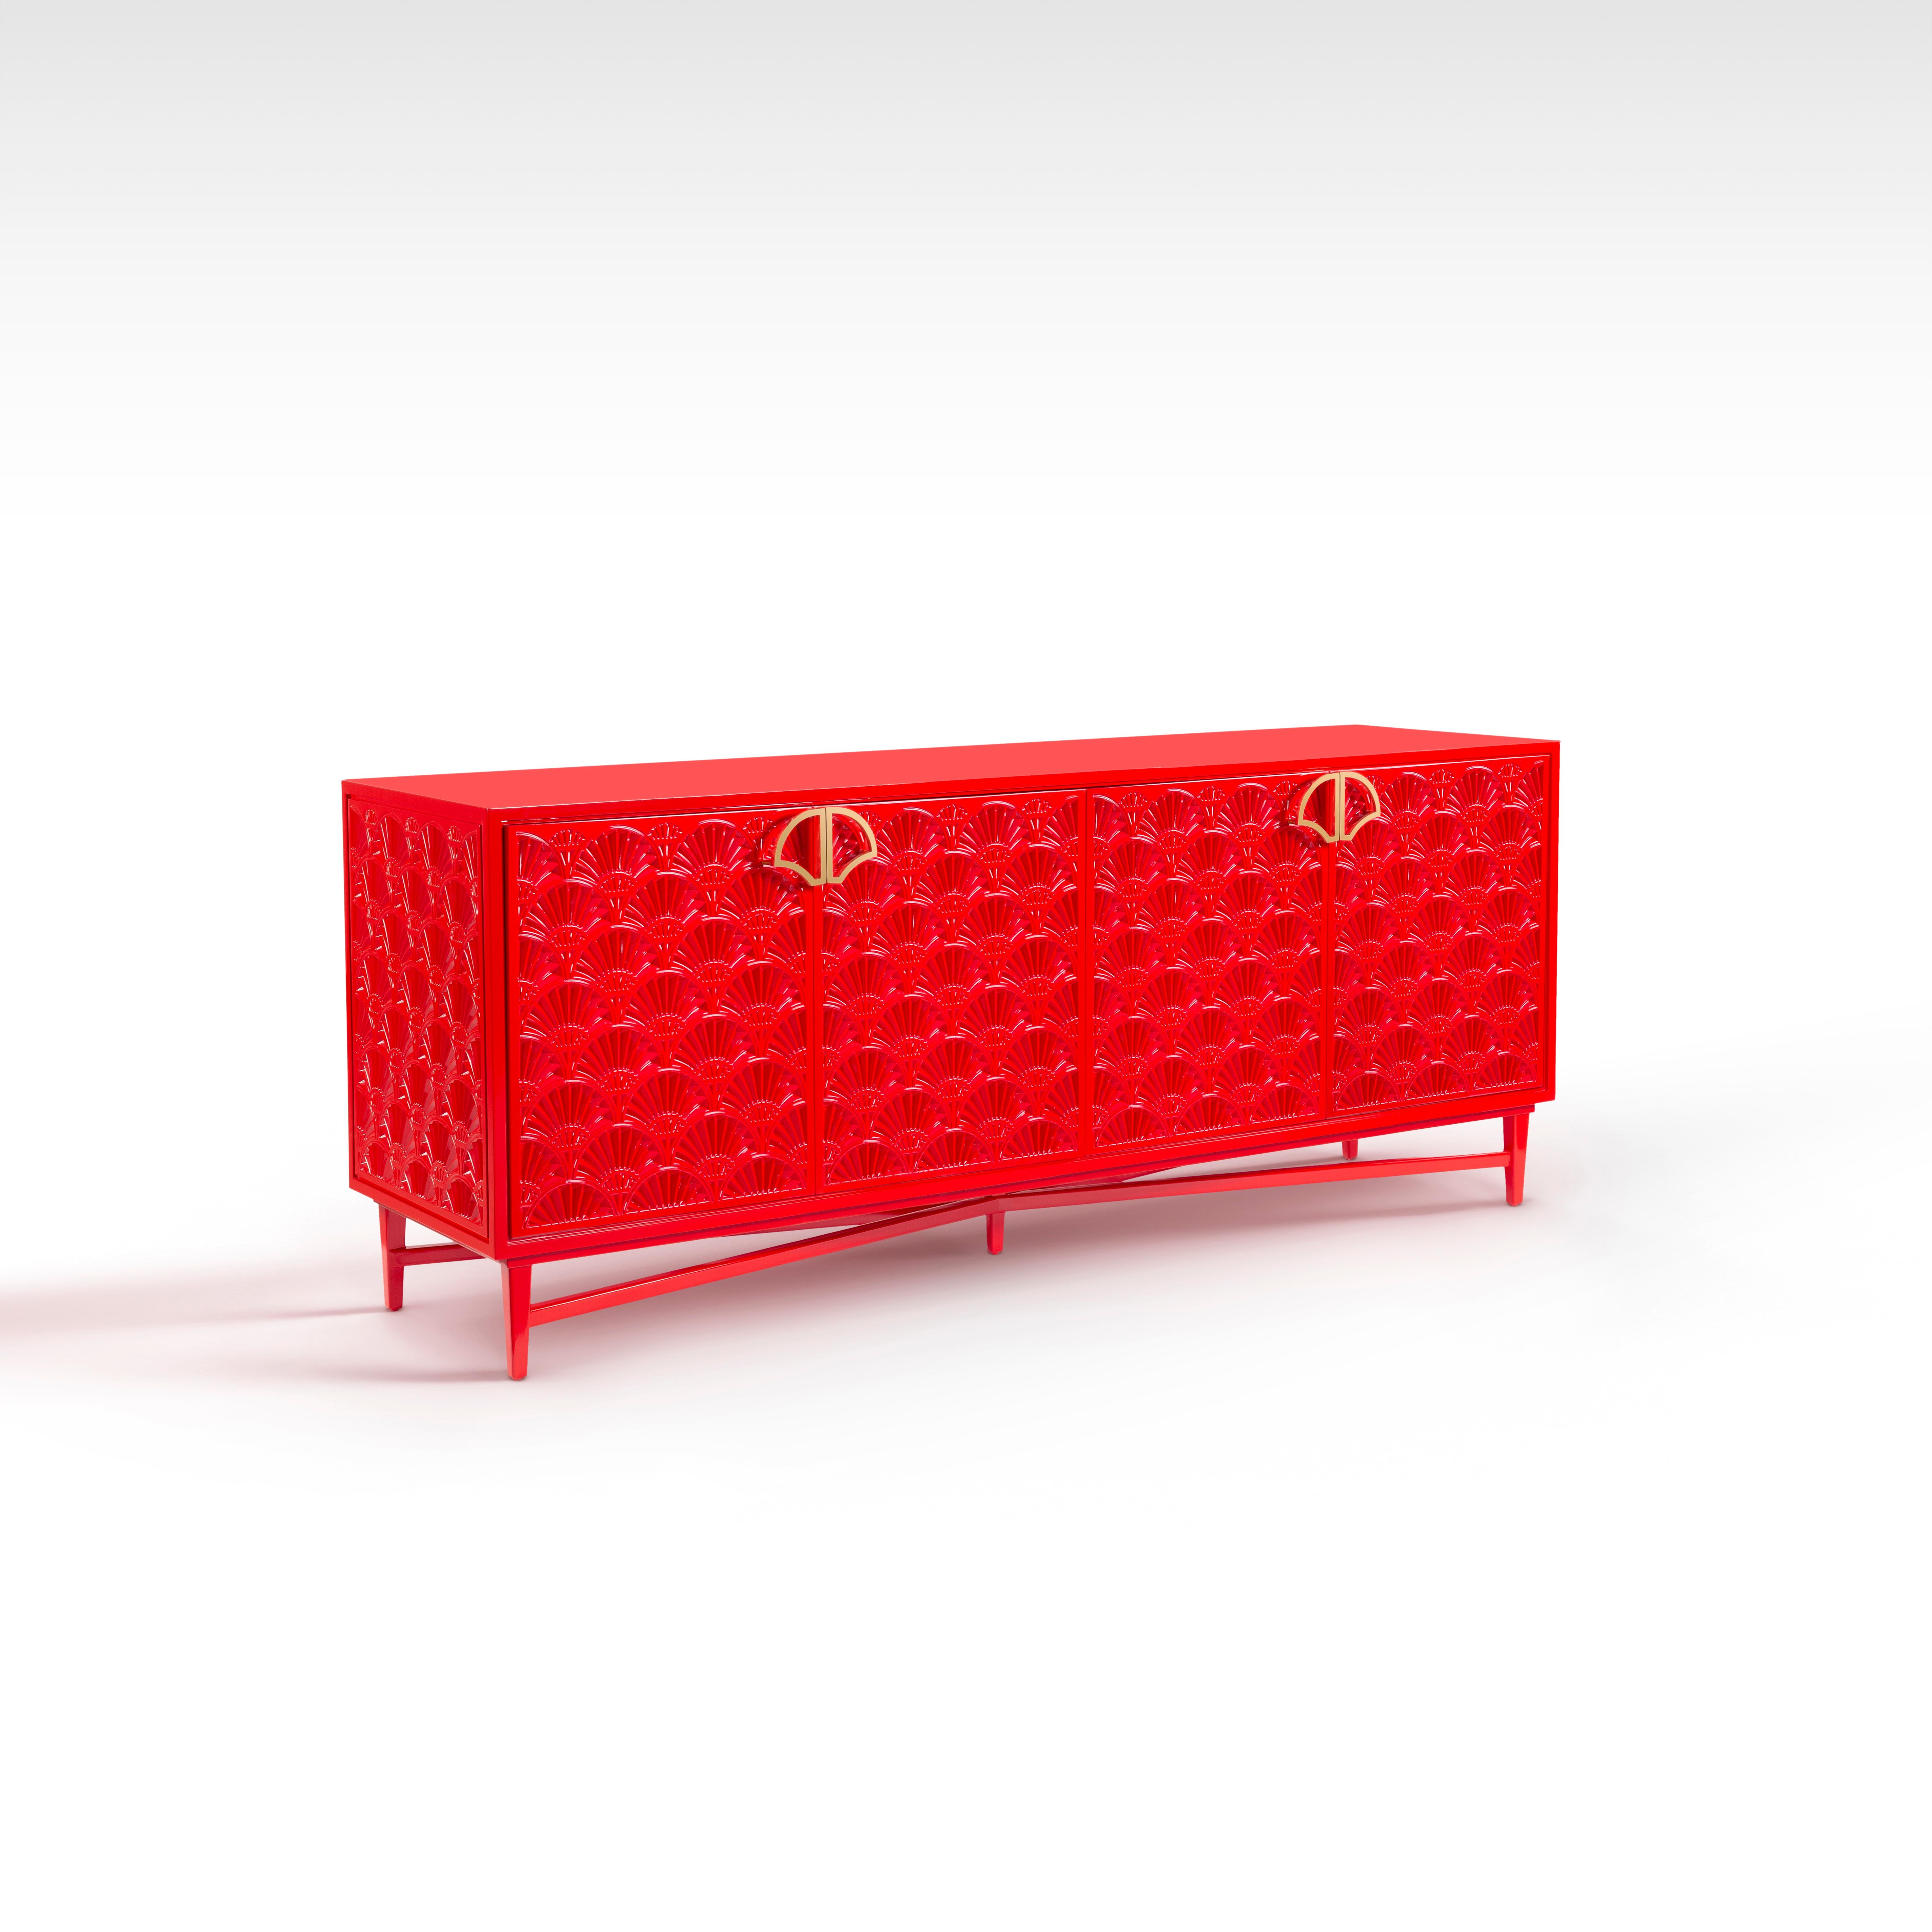 Red Lacquered Buffet with Modern Lotus Pattern and Brass Lotus Handle.
A contemporary twist to the beautiful lotus motif inspired by our Pharaonic heritage. The design of the buffet is comprised of a recurring pattern of the ancient holistic symbol